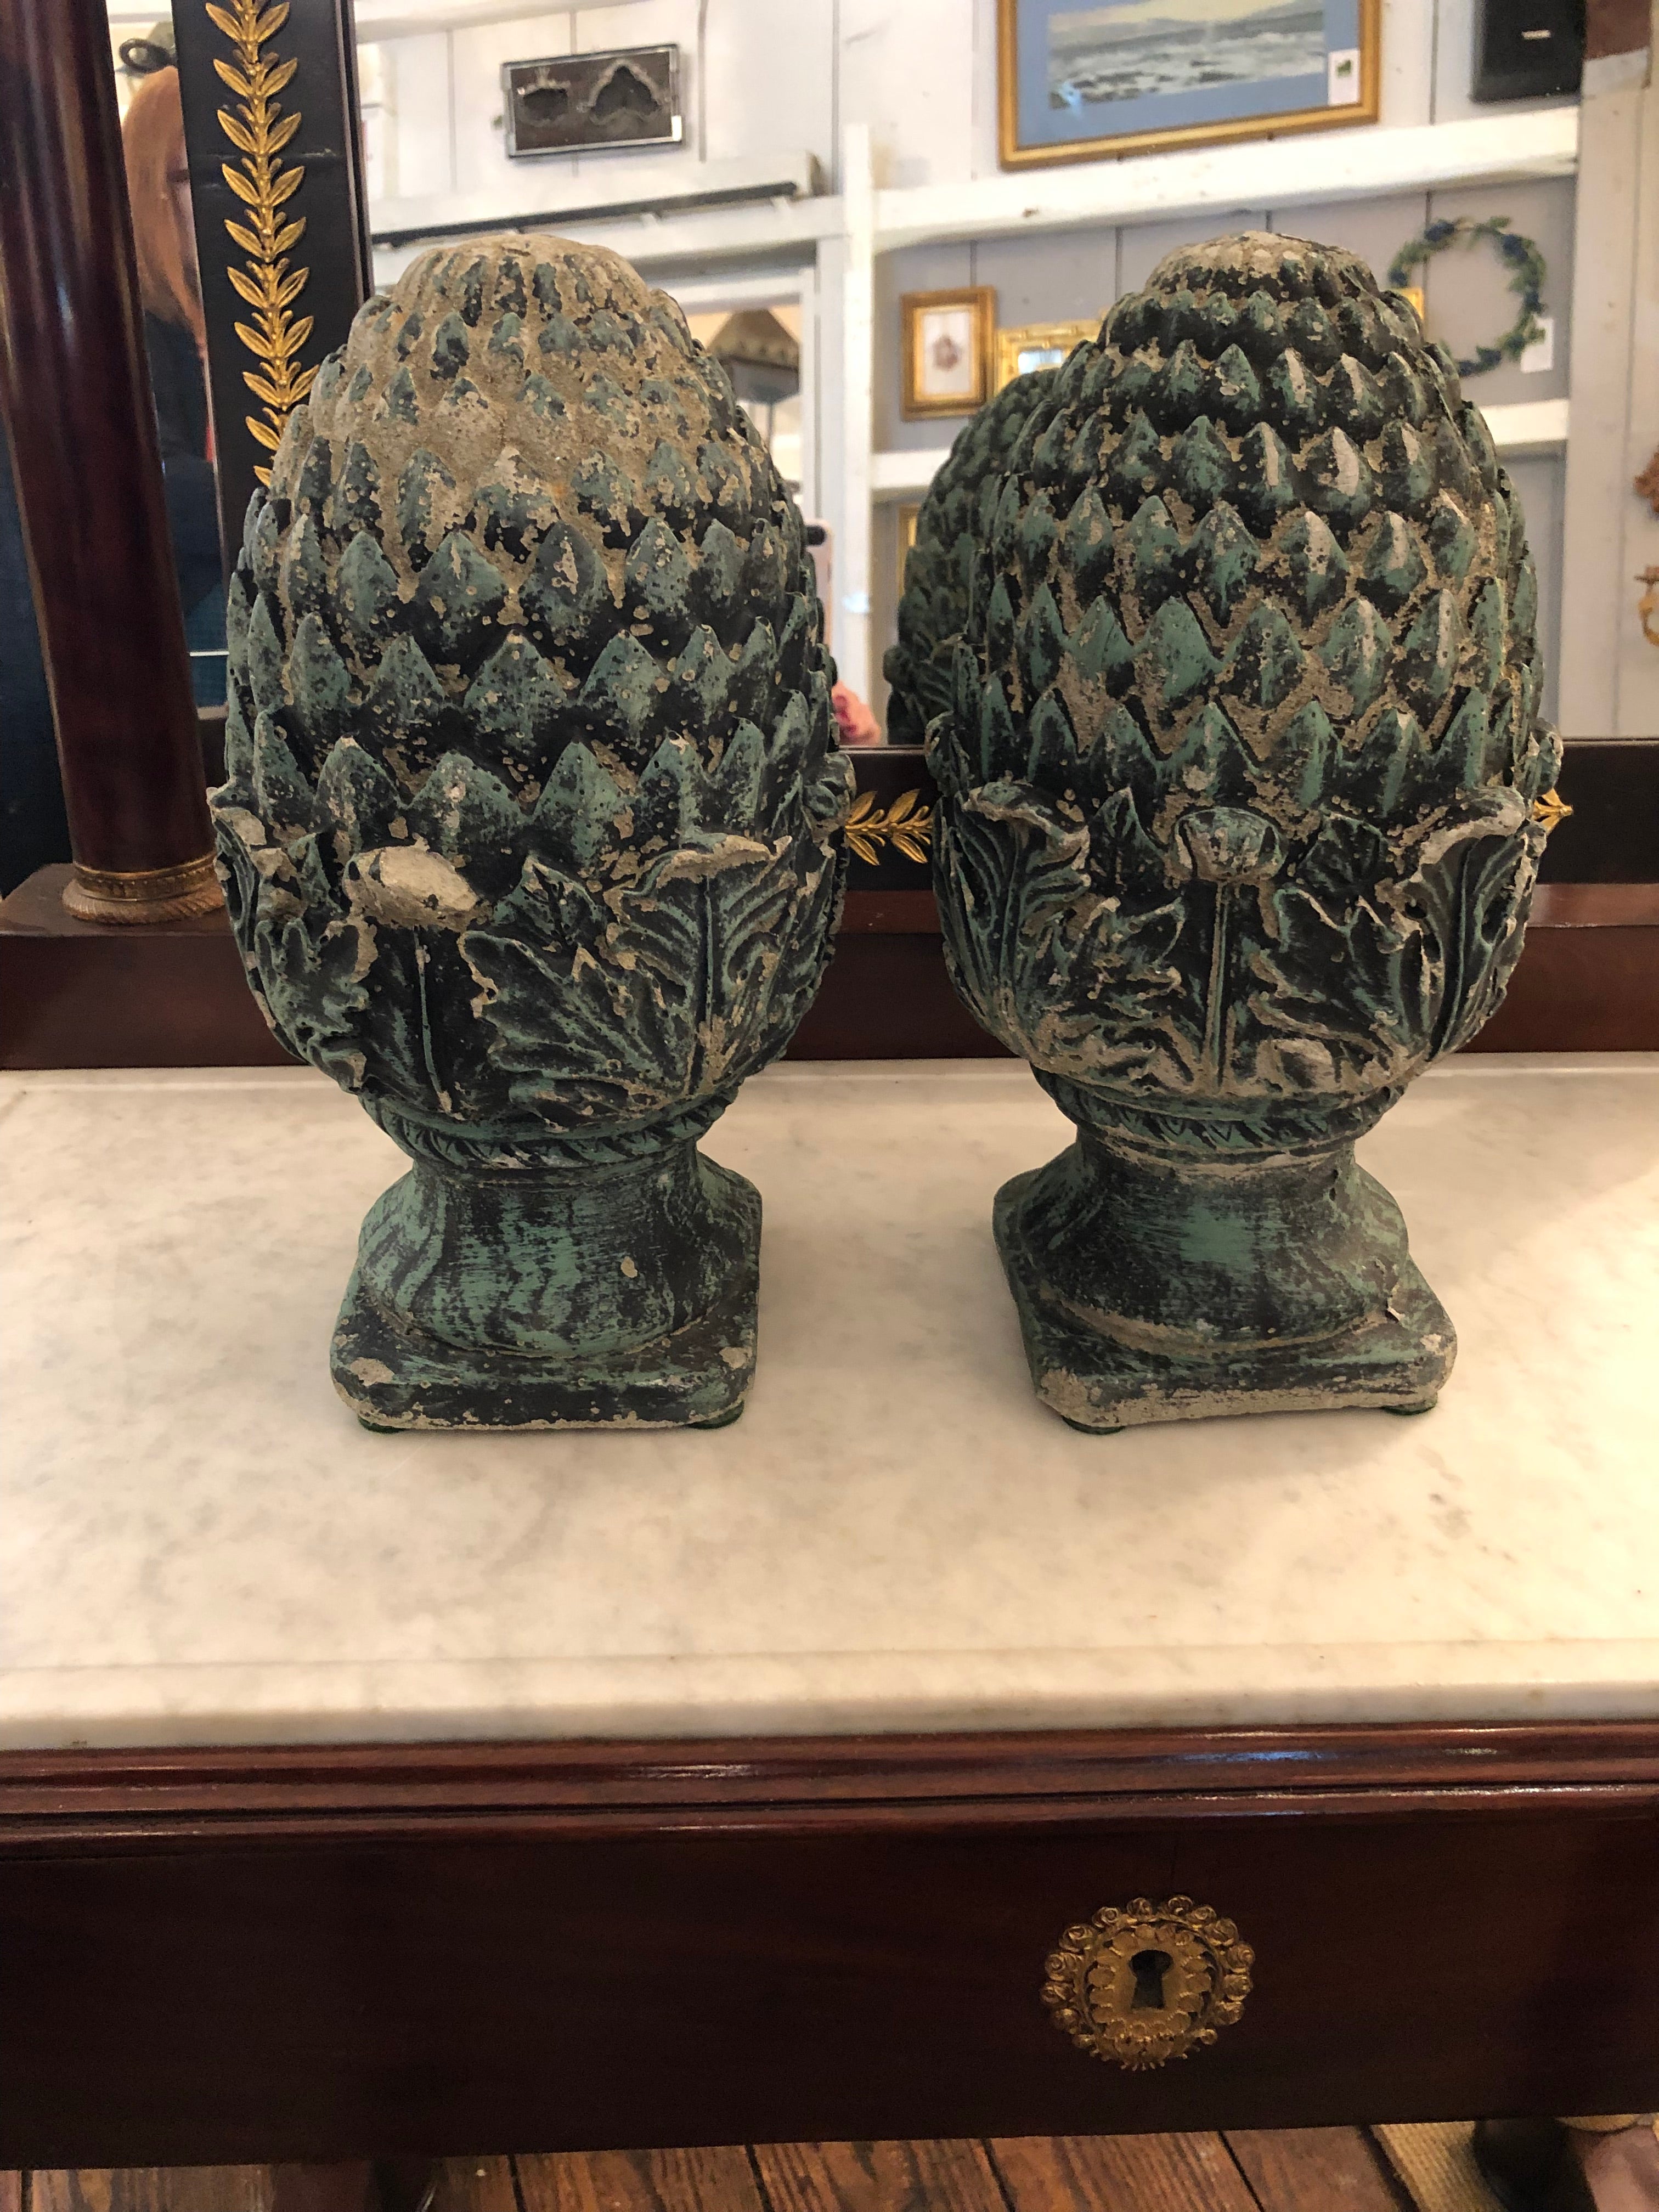 Timeless pineapple motife cast cement finials or acorns having marvelous aged and verdigris patina. The imperfections where some of the cement has chipped off, and the slight differences in the finials, adds to the beauty. Can be used in the garden